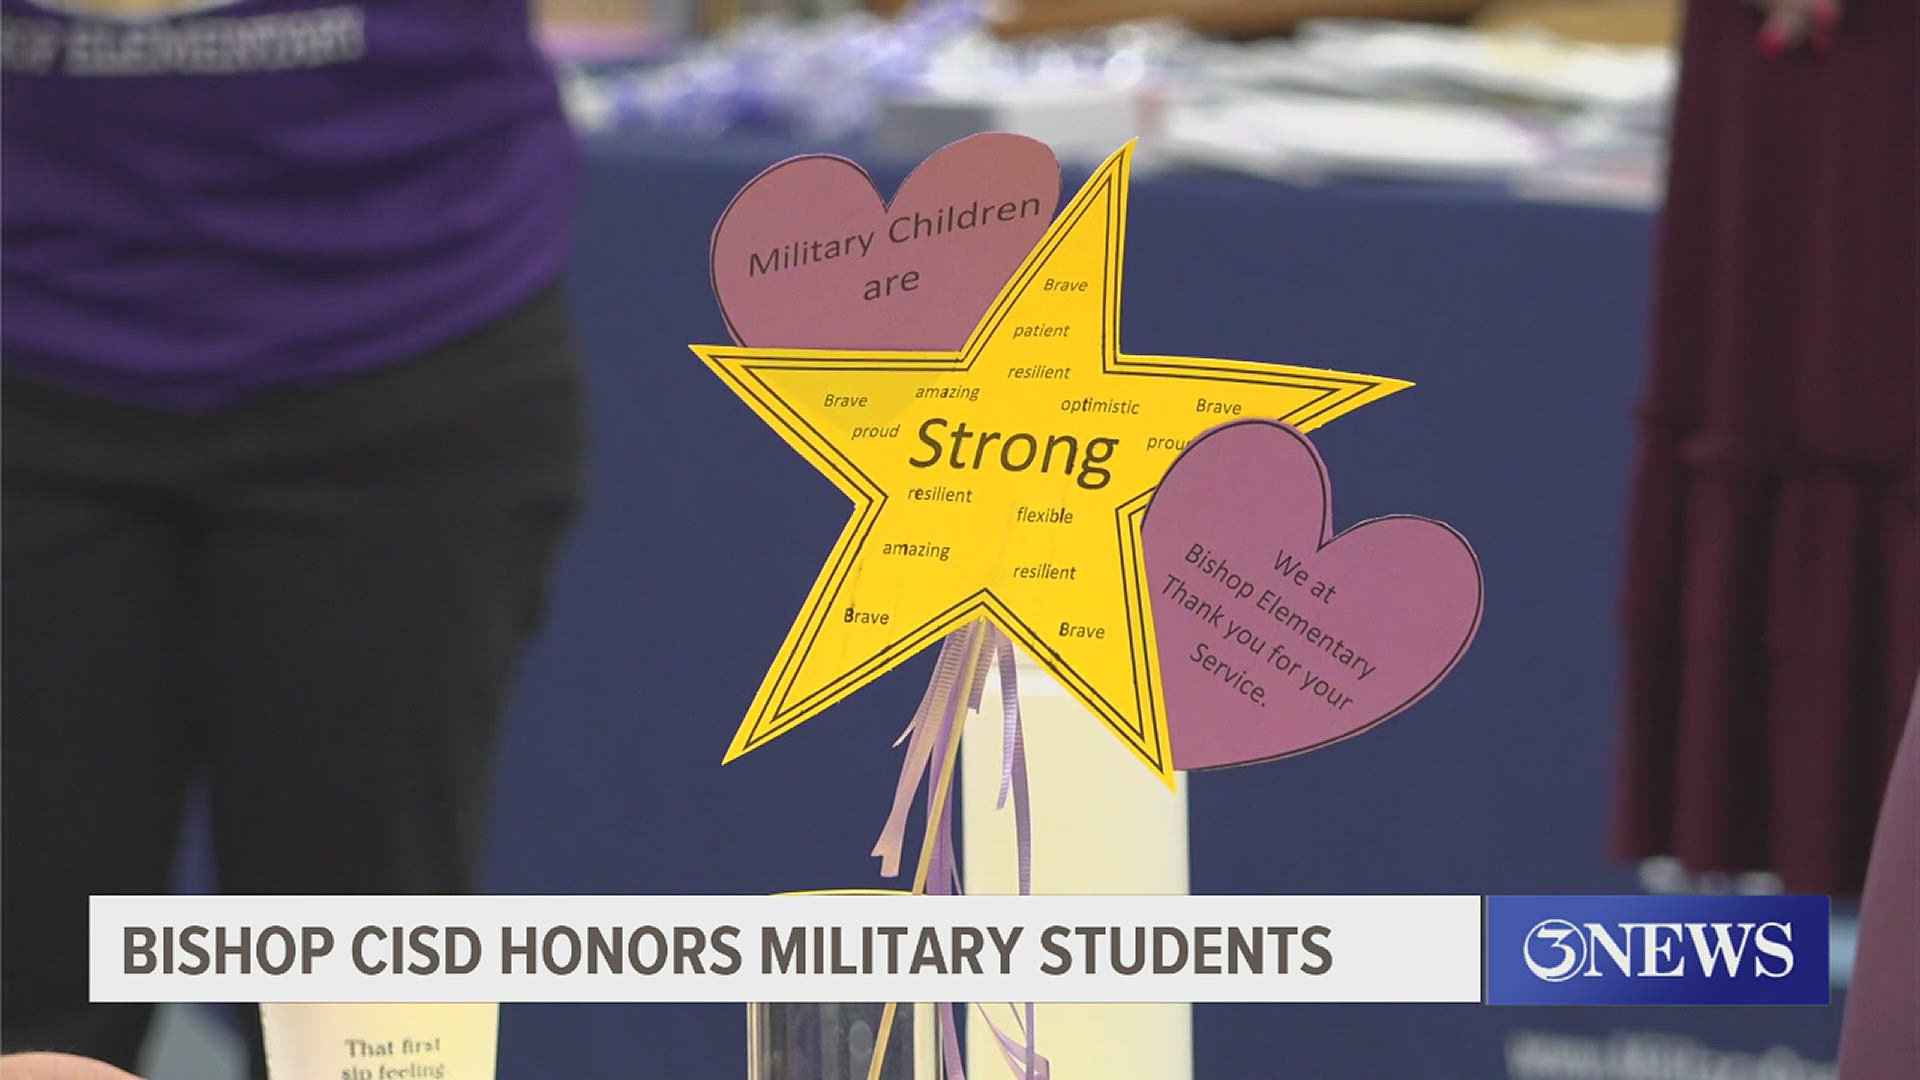 The 'Month of the Military Child' serves as a special honor for military children and their families.